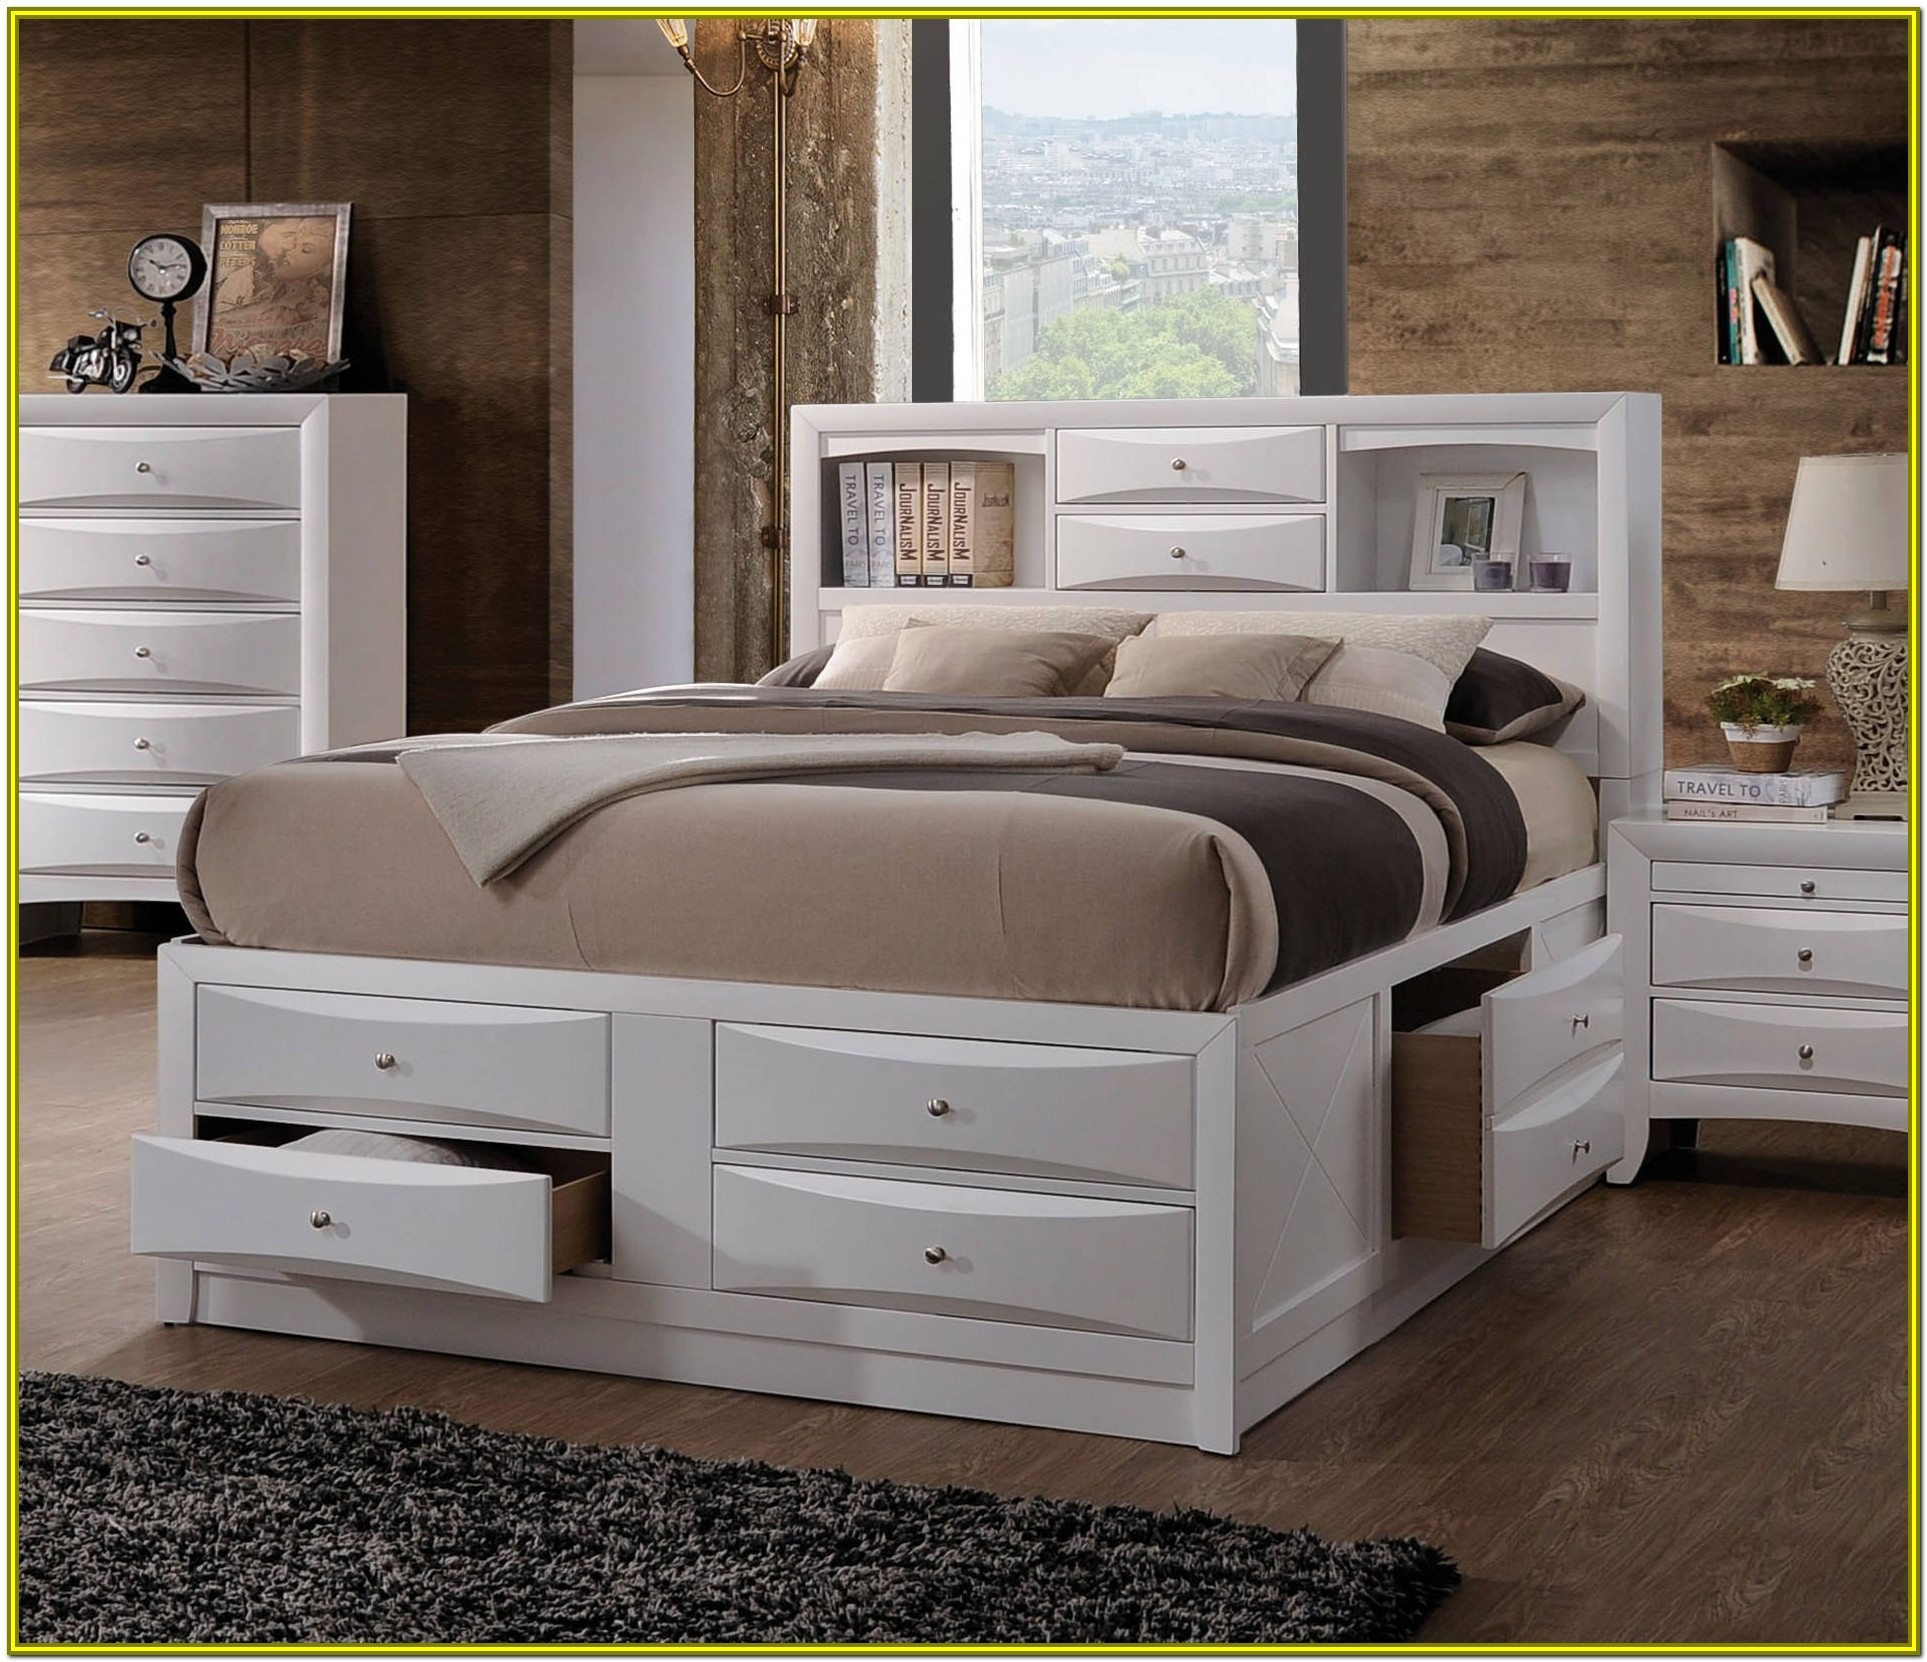 Platform Bed With Drawers Visualhunt, King Bed With Side Storage